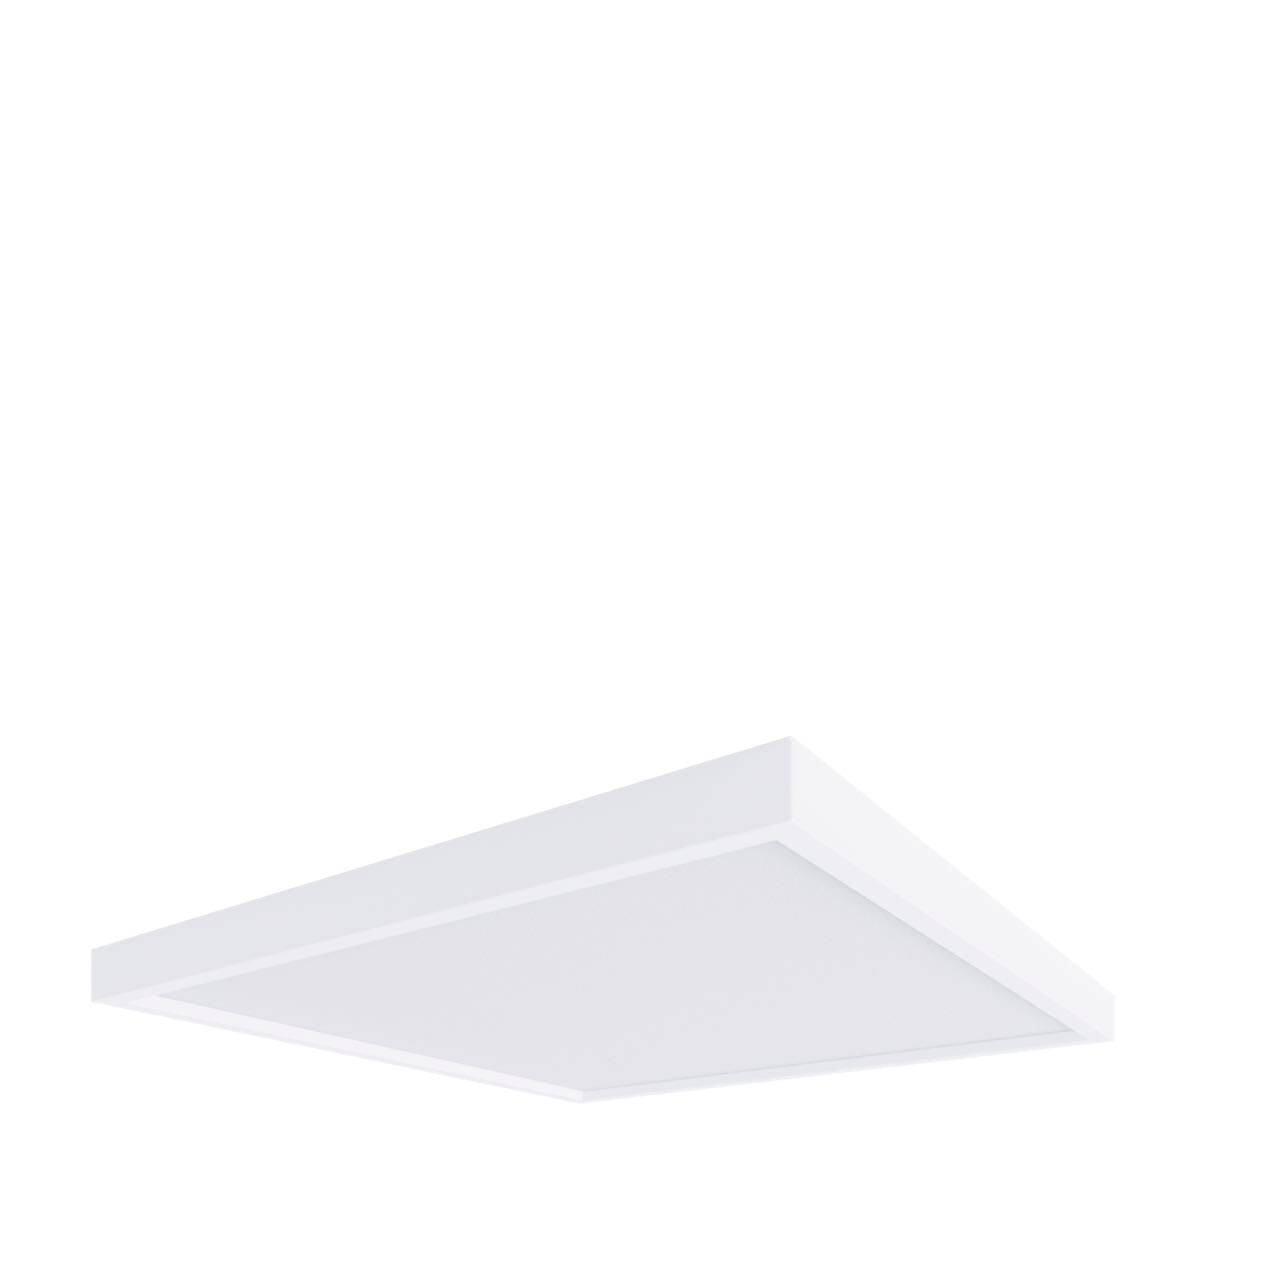 Versatile and Stylish Square LED Surface Mount Downlights with Multiple CCT Options - Available in 4 Sizes and ETL/Energy Star Certified - Perfect for Residential and Commercial Spaces - Eco LED Lightings 